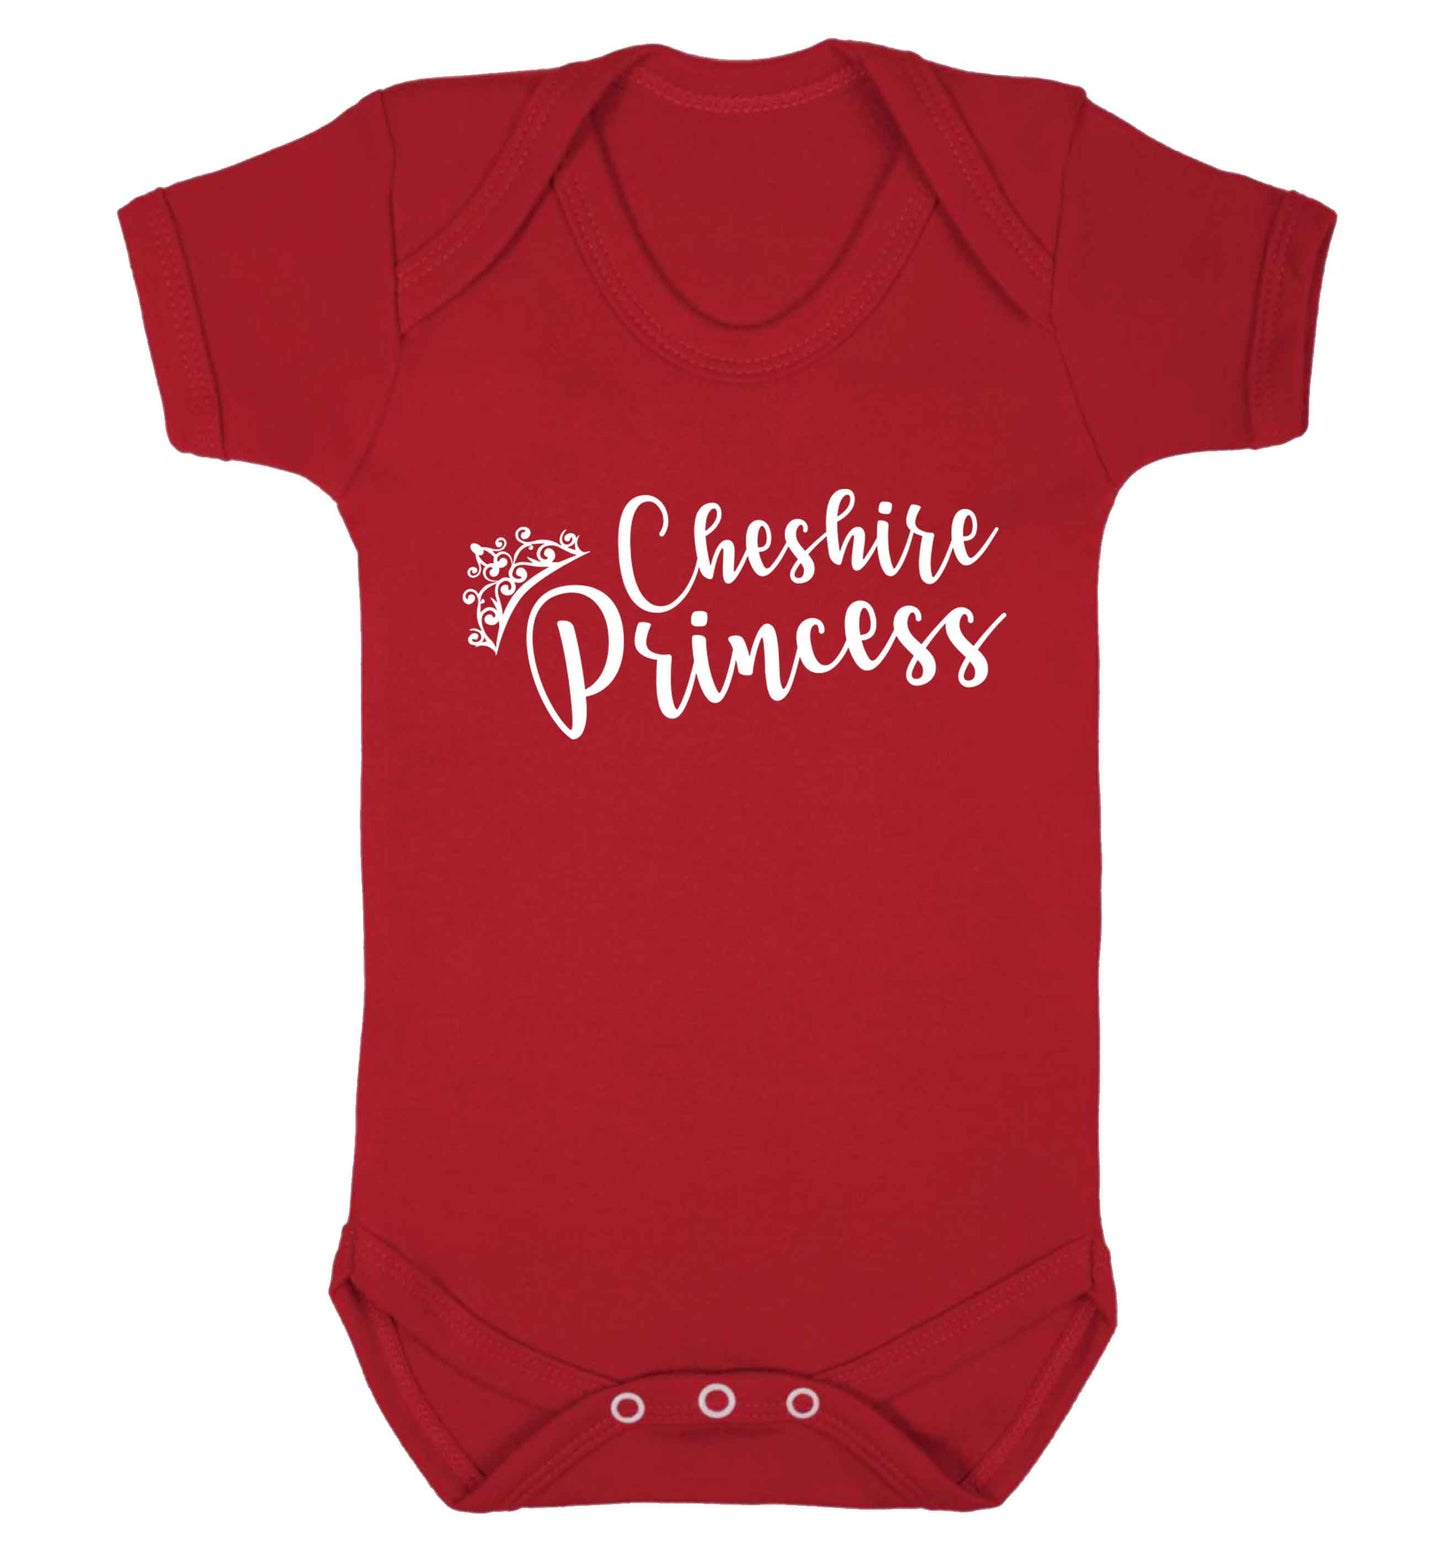 Cheshire princess Baby Vest red 18-24 months